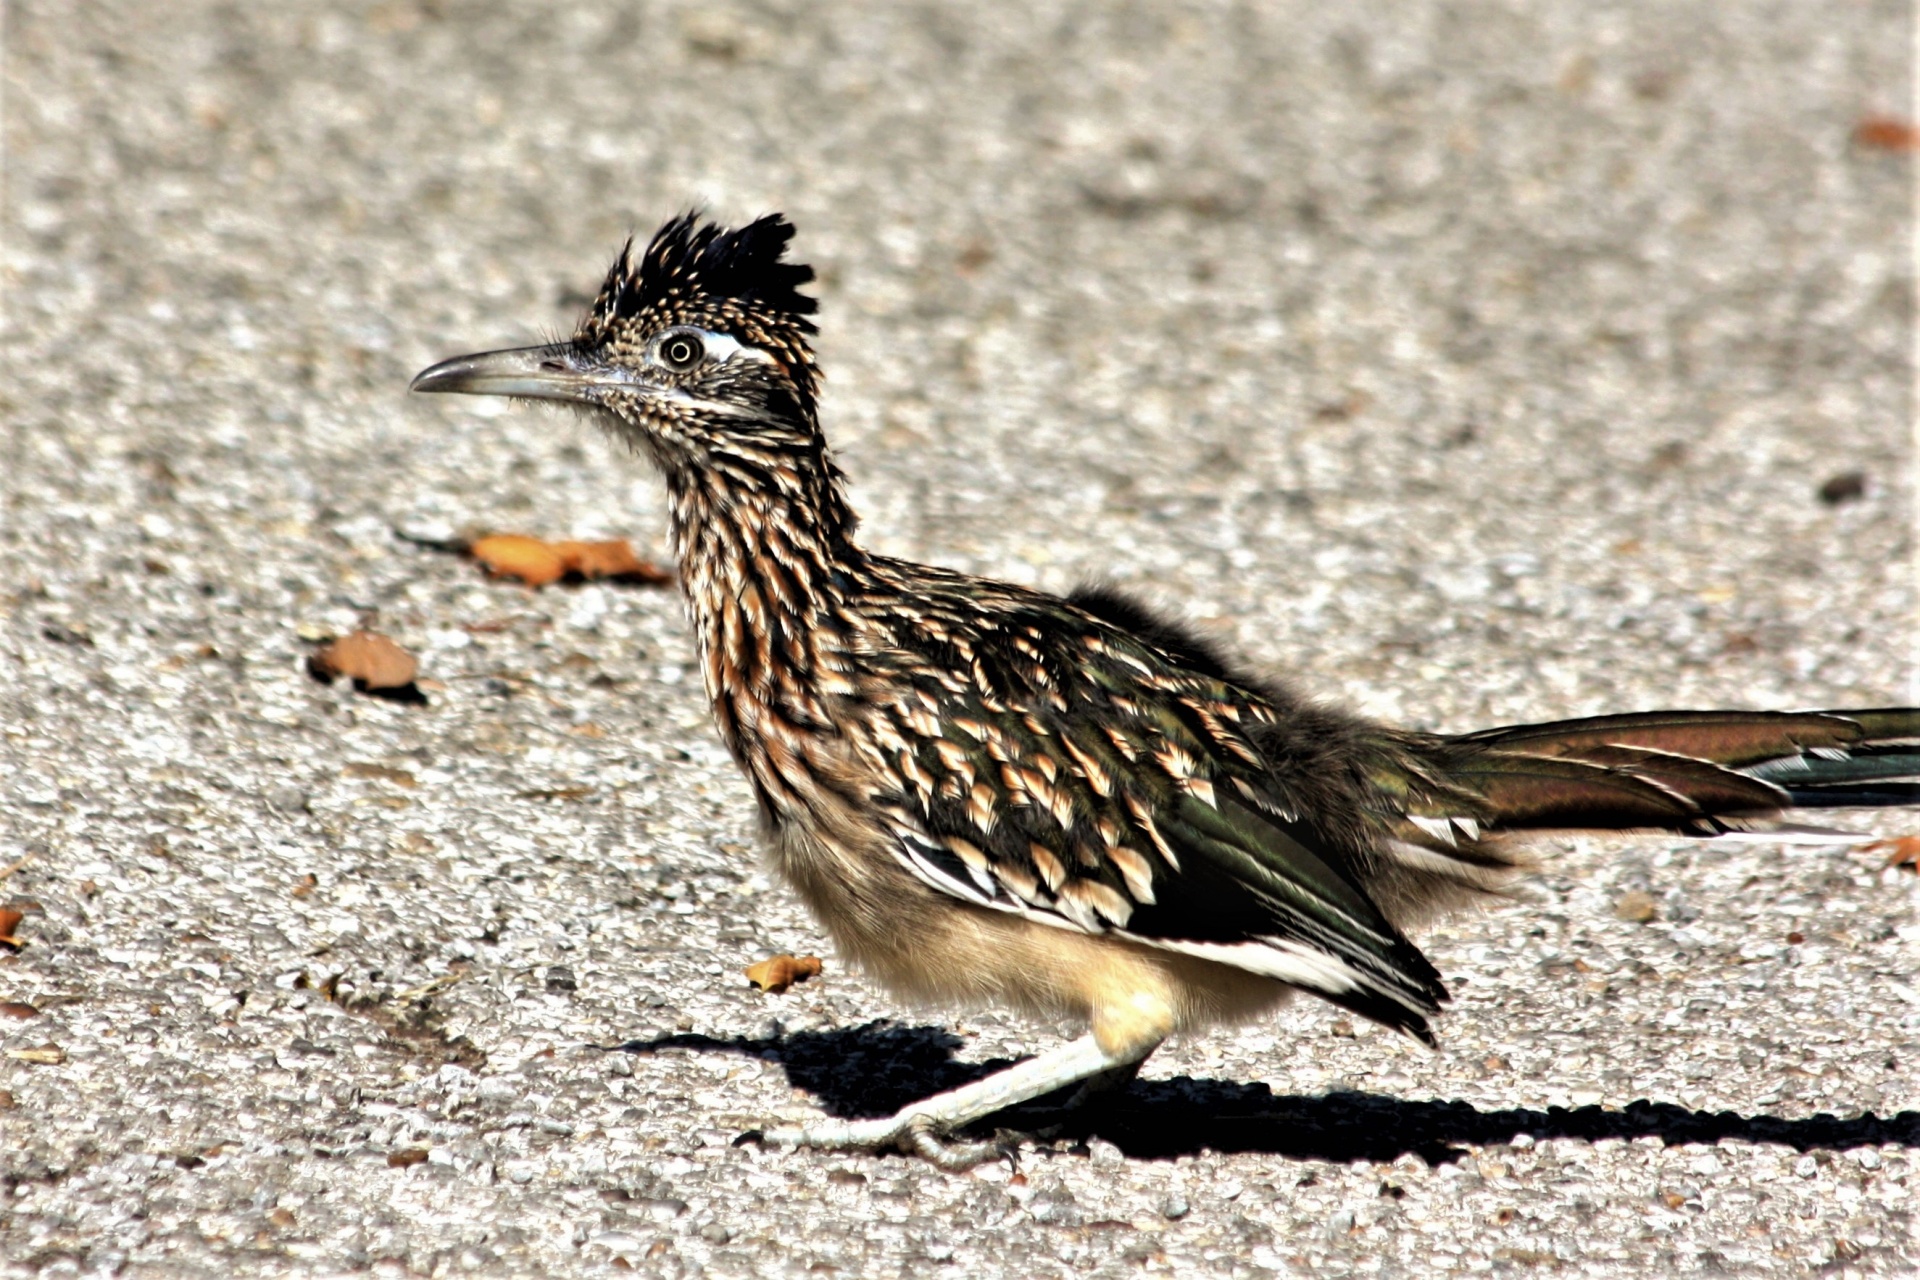 Close-up profile of a roadrunner bird standing on a gray gravel road.